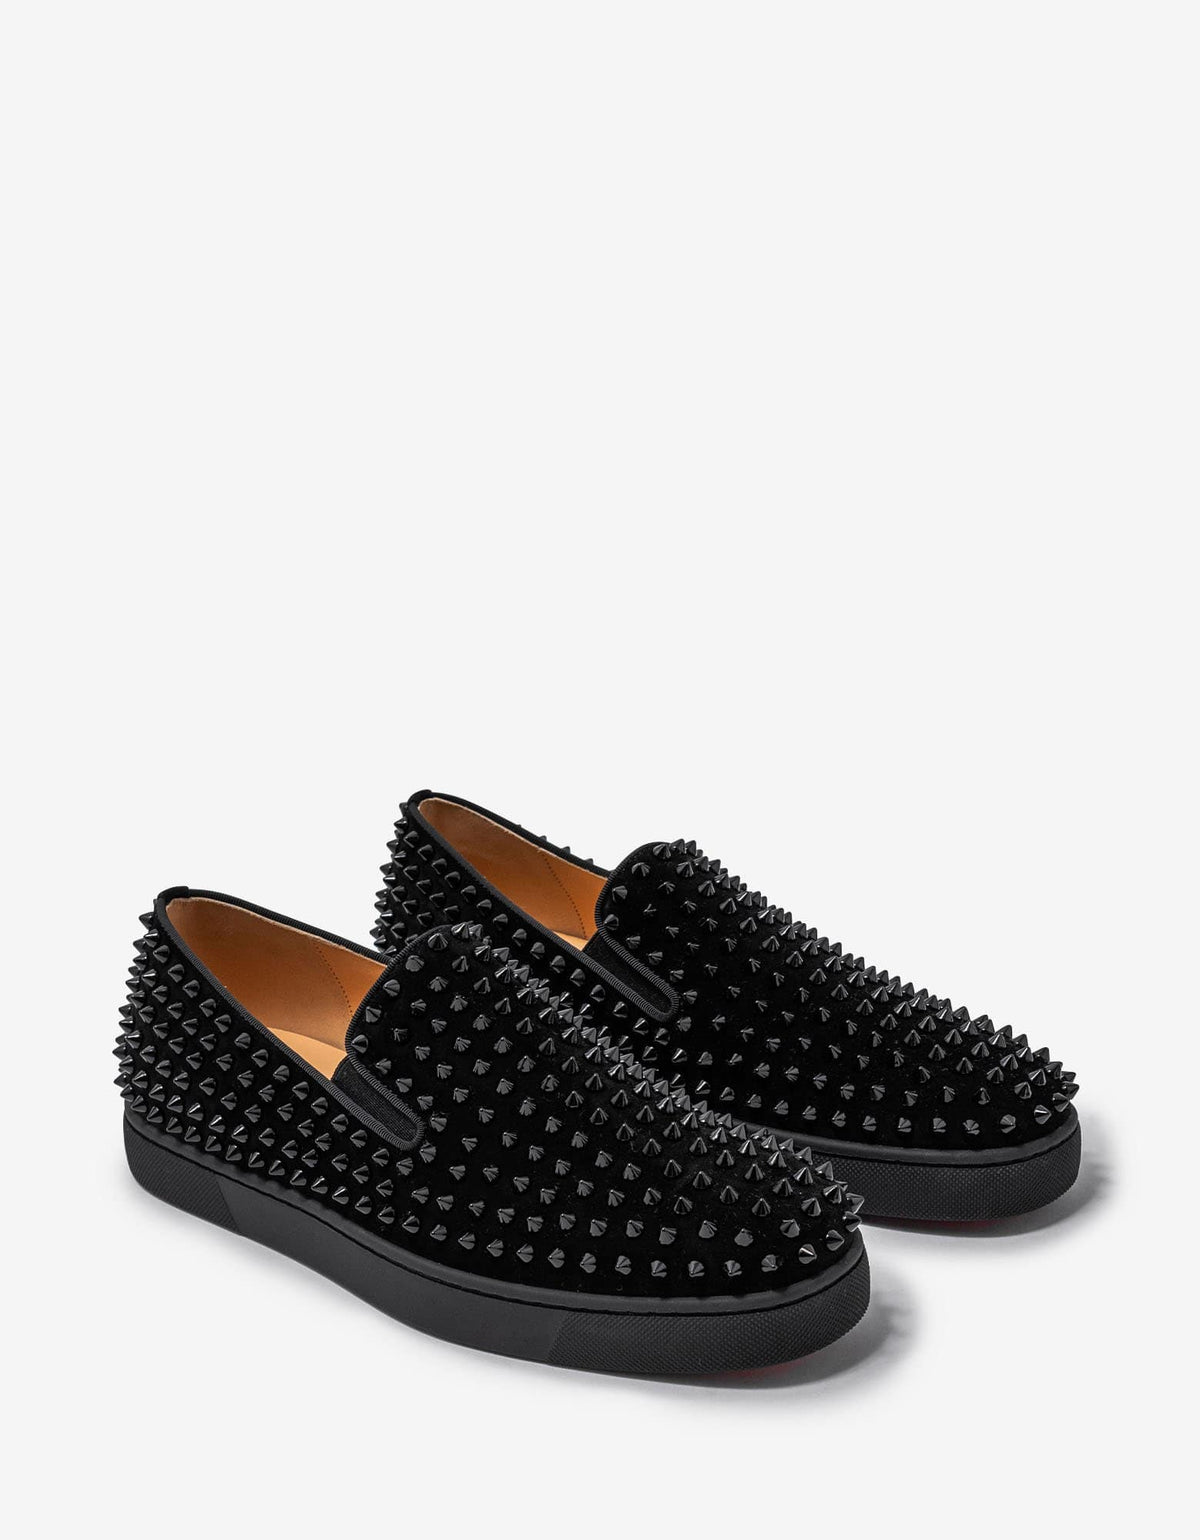 Christian Louboutin Roller-Boat Black Suede Trainers -